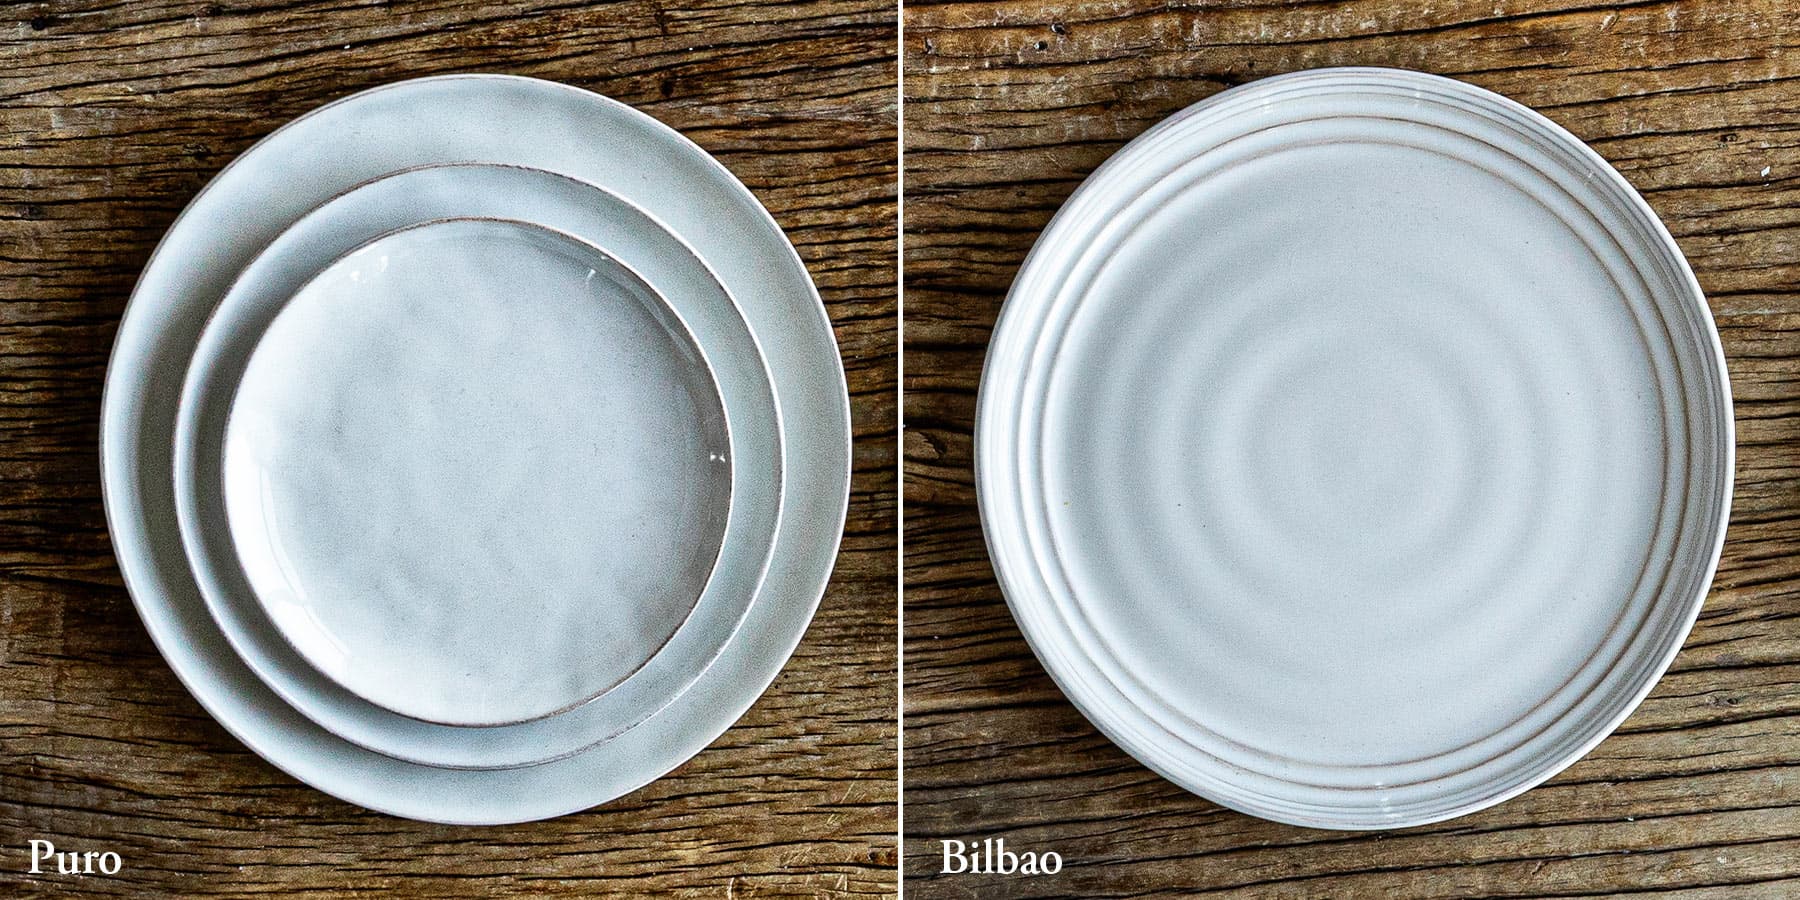 Puro collection gleams with a whitewash glaze that brings the soft texture of rumpled linen to table settings. With a spotlight on artisanal craftsmanship, our Bilbao dinnerware.